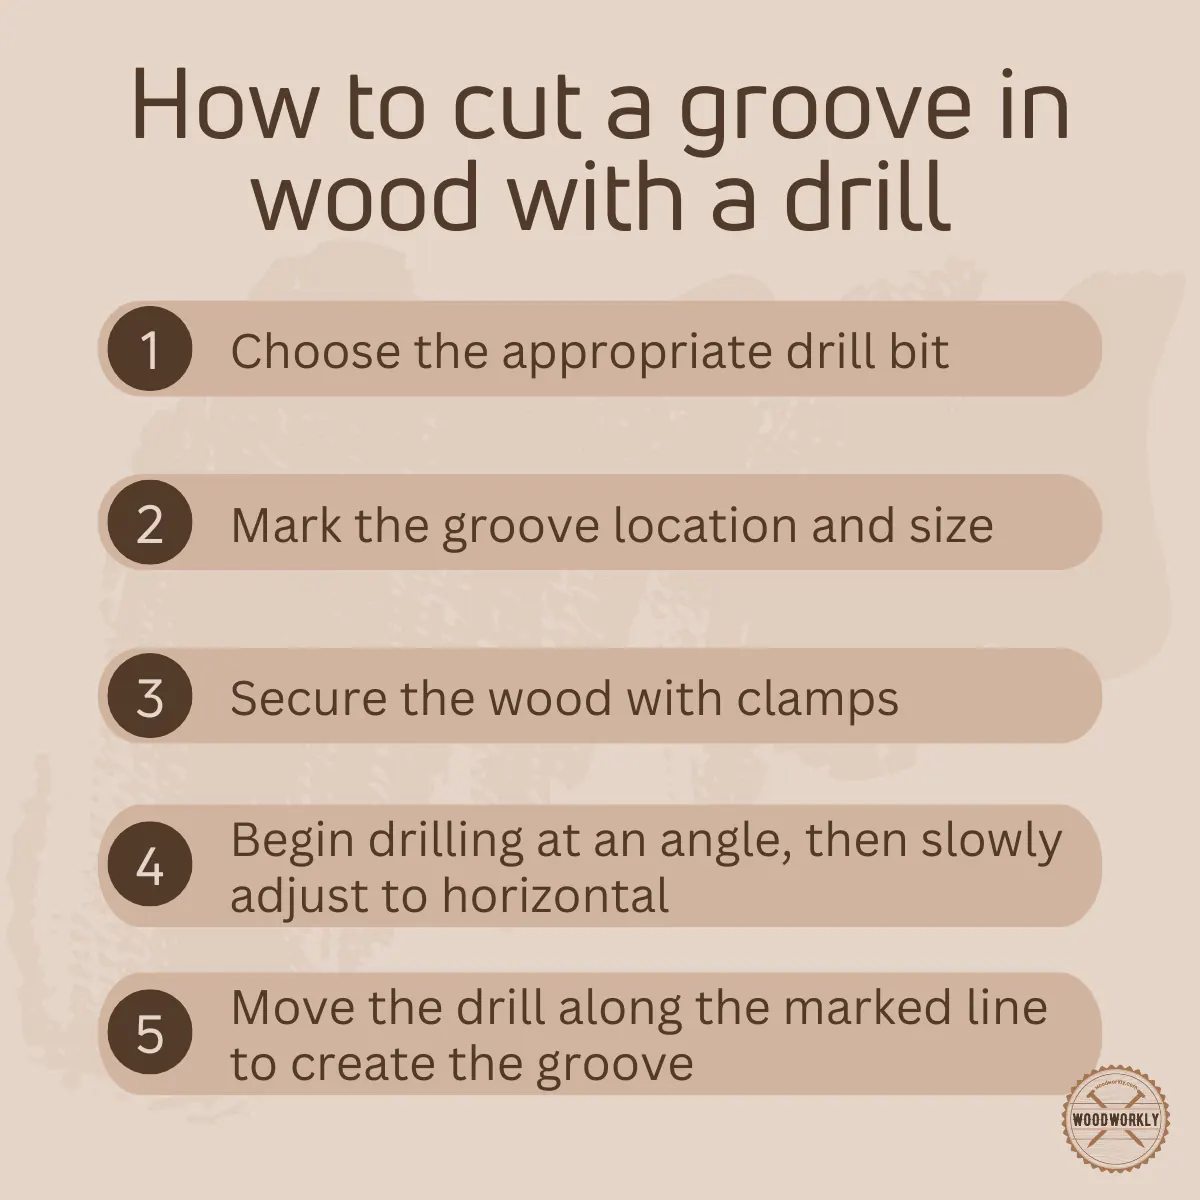 How to cut a groove in wood with a drill